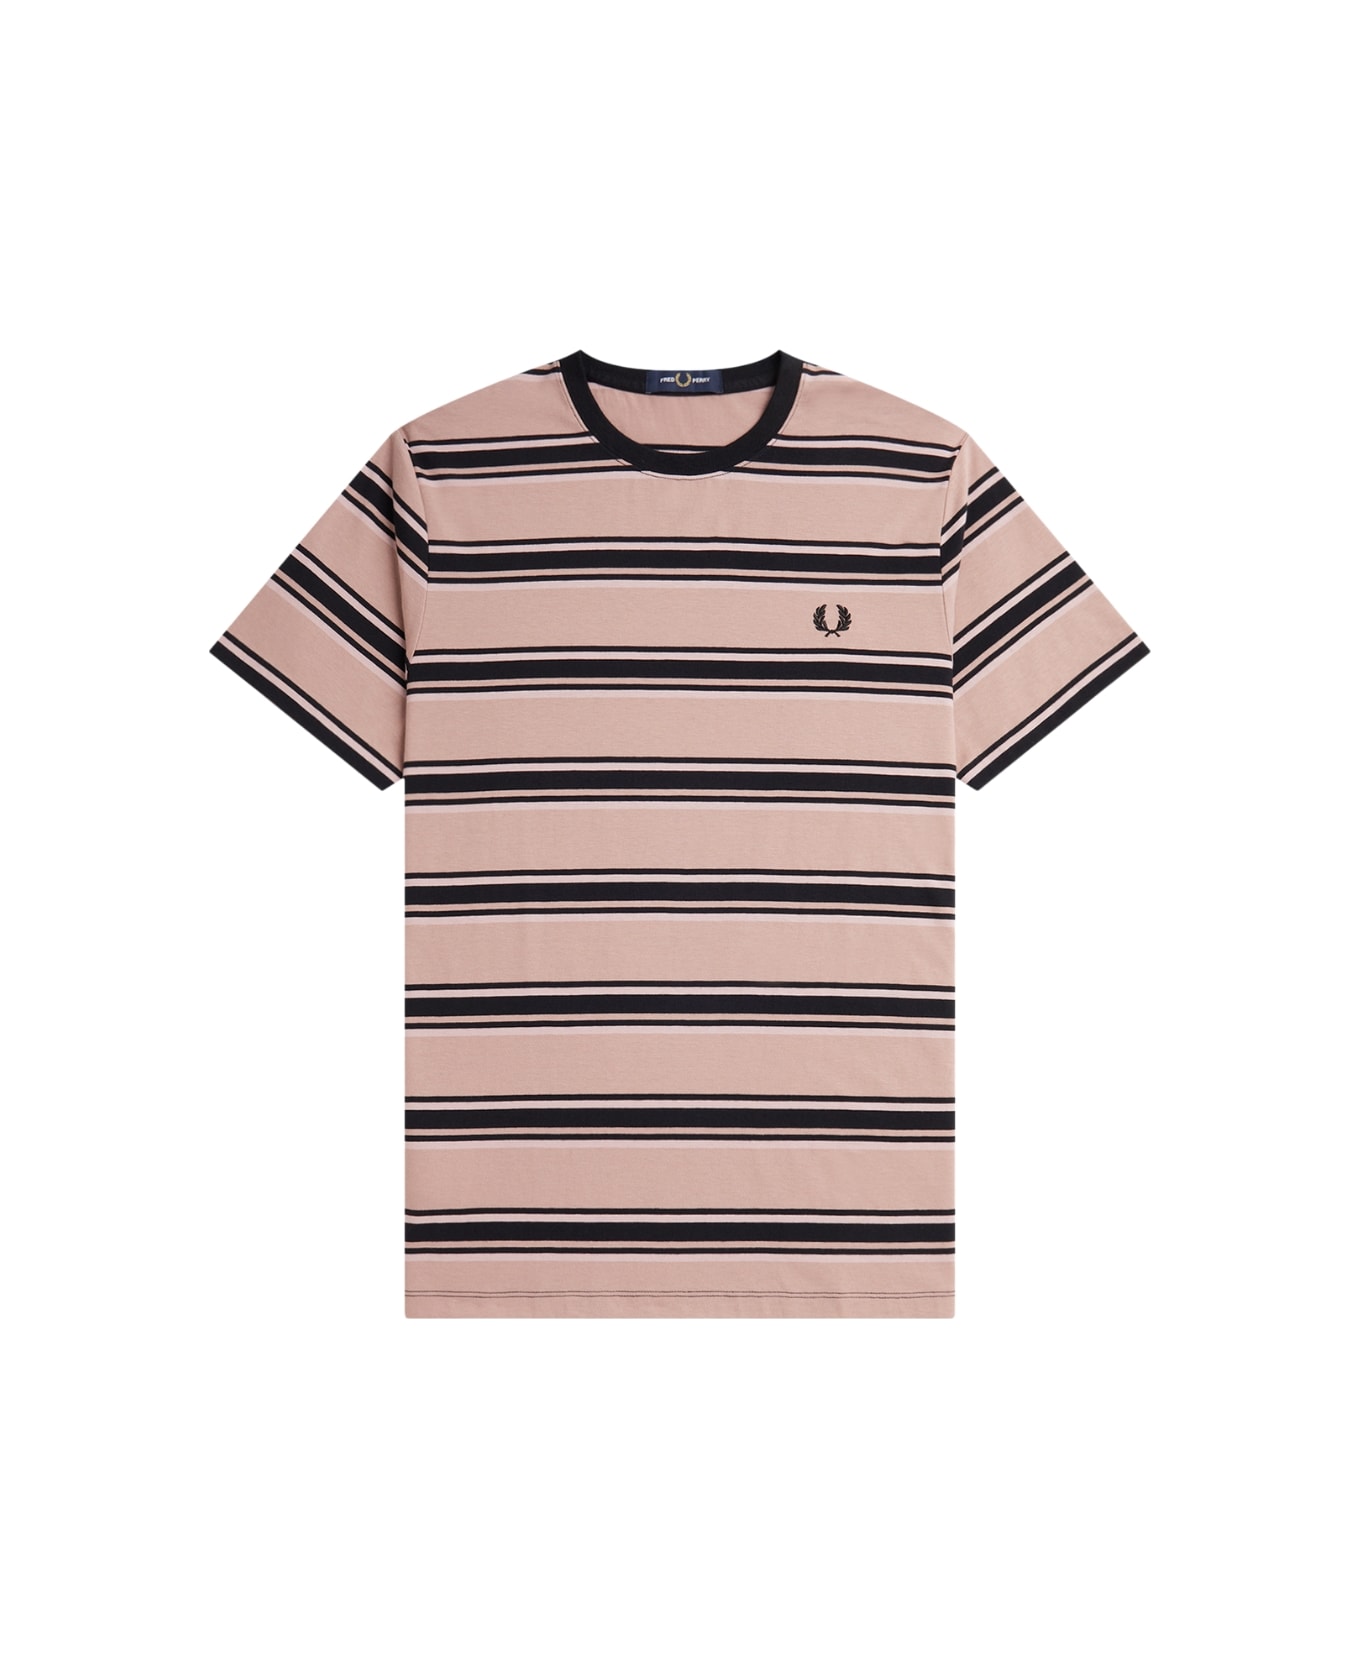 Fred Perry Fp Stripe T-shirt - Dkpink Dustro Bk